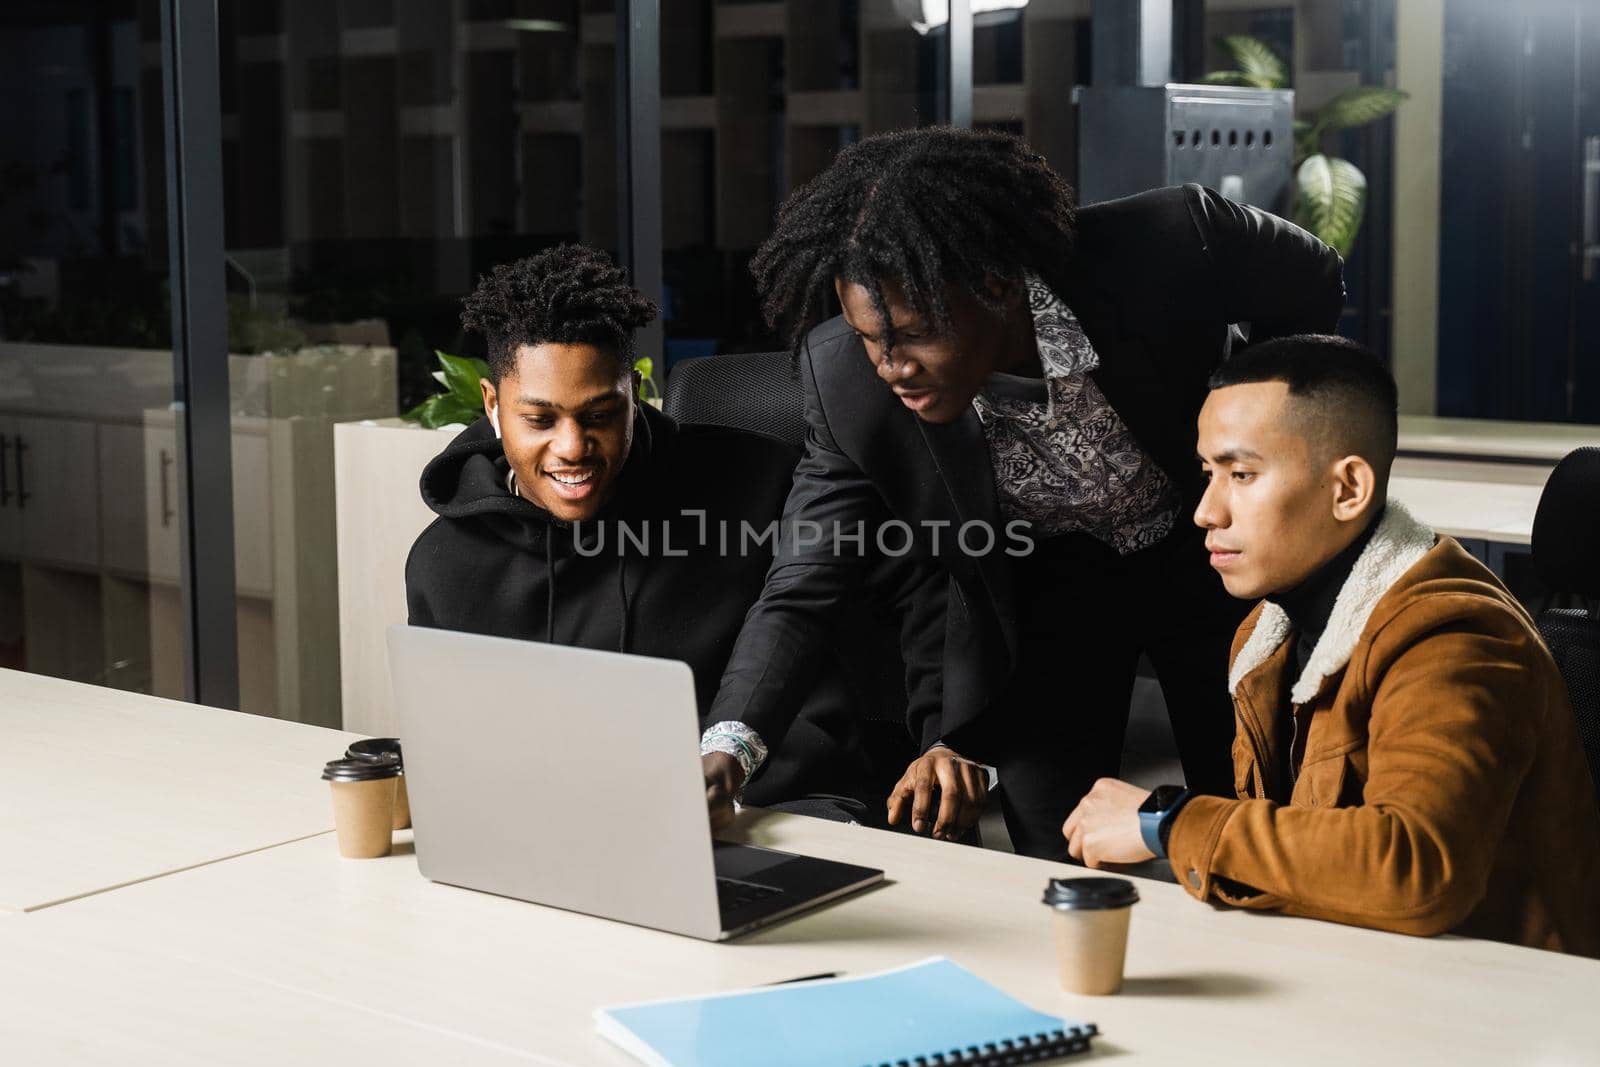 Multiethnic group of African and Asian colleagues are working on laptop on business project. Two black handsome managers teamwork with an Asian man and create creative ideas